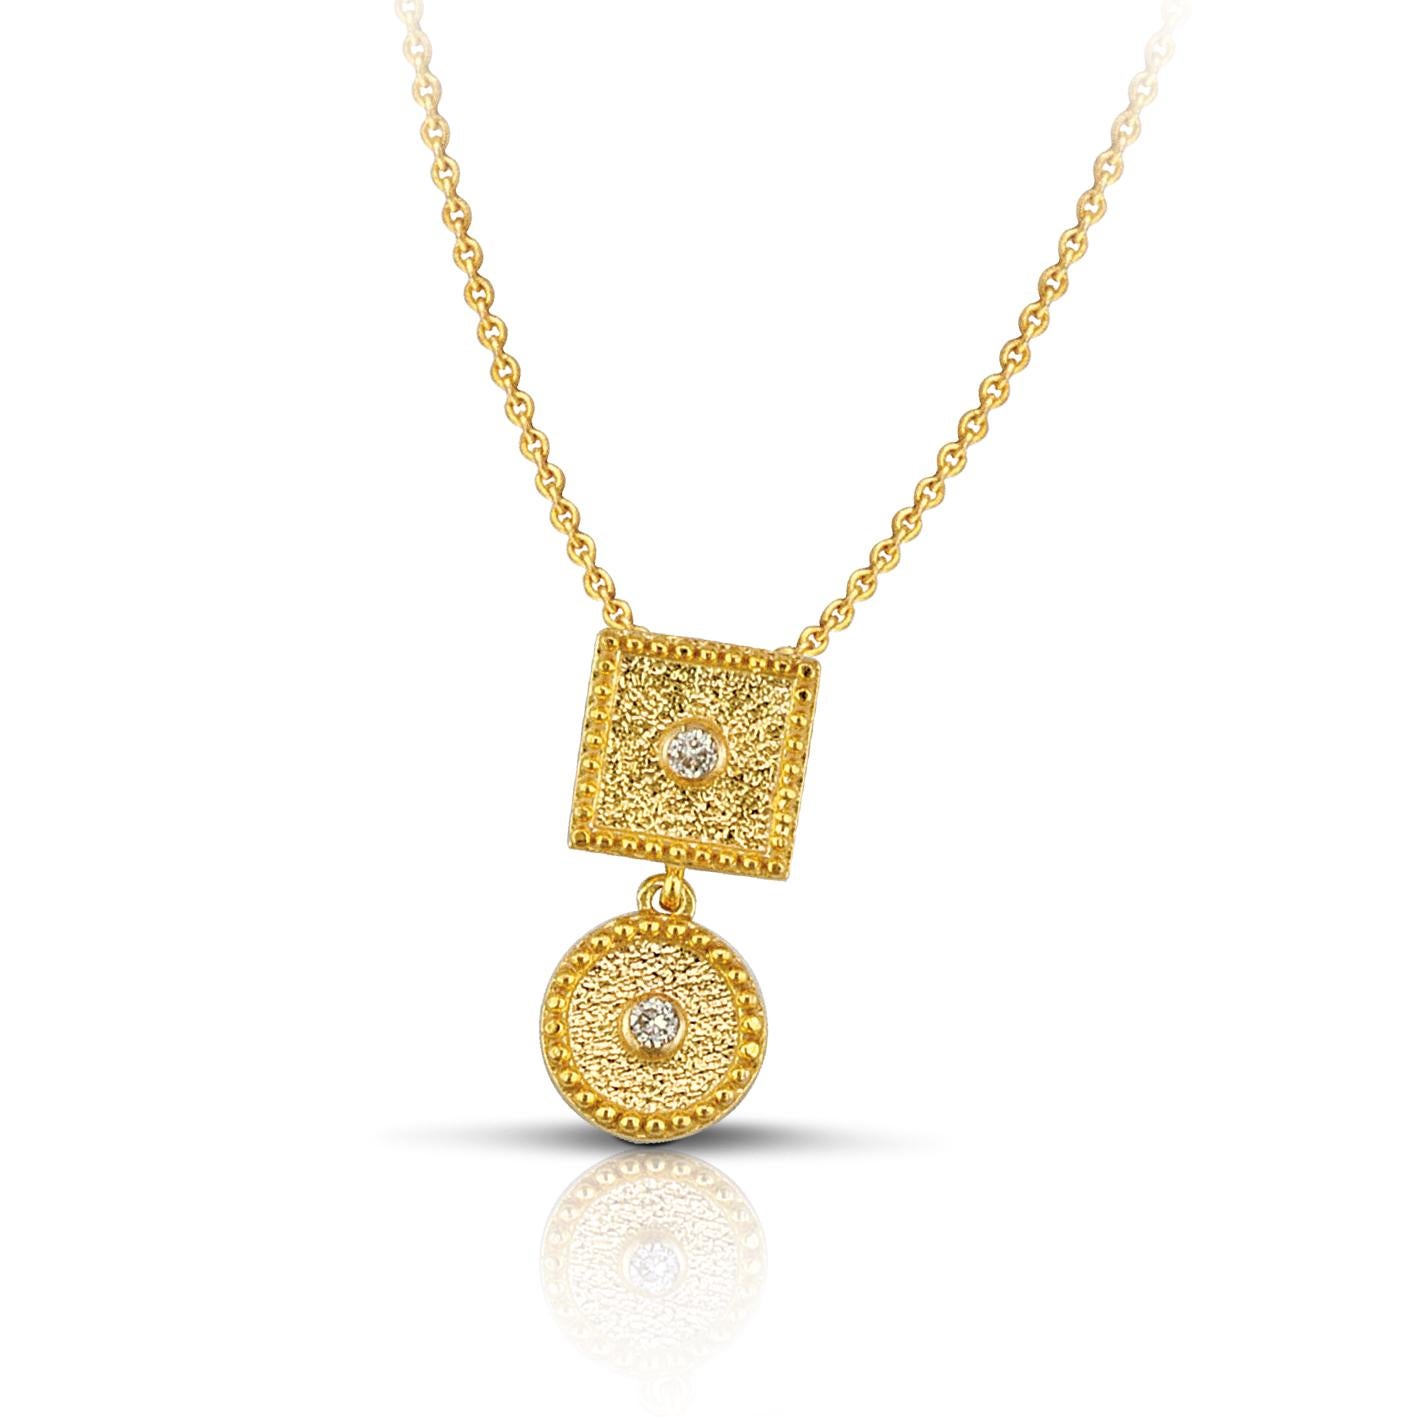 S.Georgios Design Pendant is all handmade from solid 18 Karat Yellow Gold and is microscopically decorated with granulation work all the way around. The background of the pendant has a unique velvet look and features 2 Brilliant cut Diamonds total